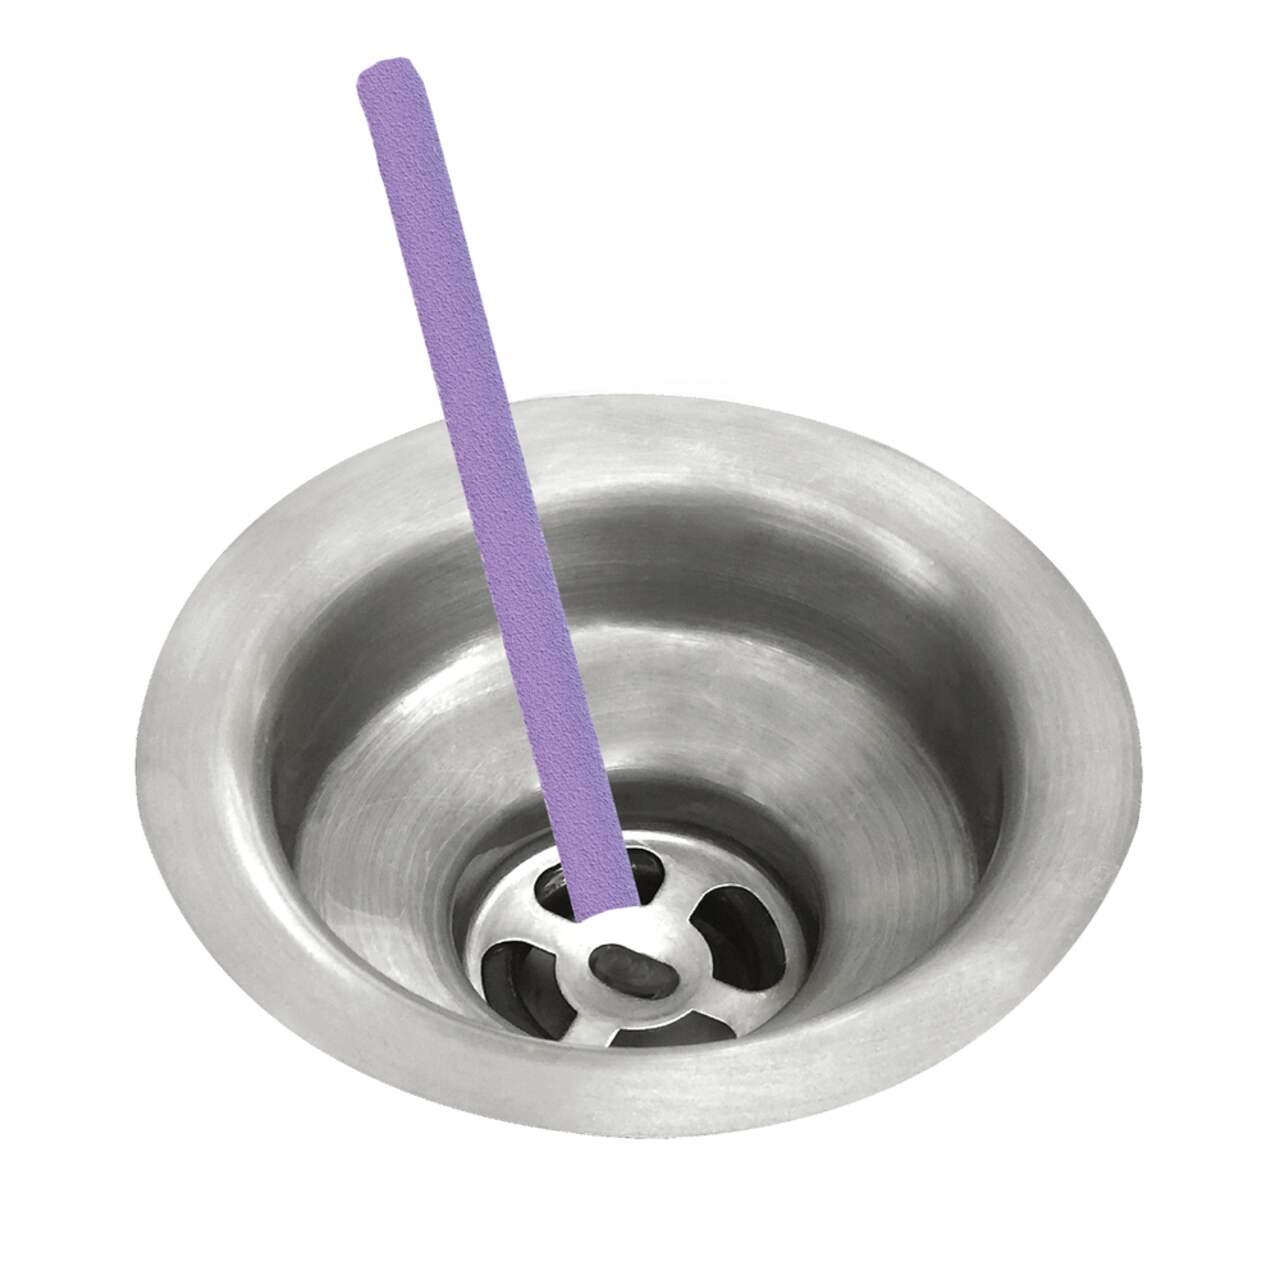 https://media-www.canadiantire.ca/product/fixing/plumbing/rough-plumbing/0634866/sanisticks-lavender-530e9ca0-b003-4e98-a1ec-278bdc295569.png?imdensity=1&imwidth=1244&impolicy=mZoom